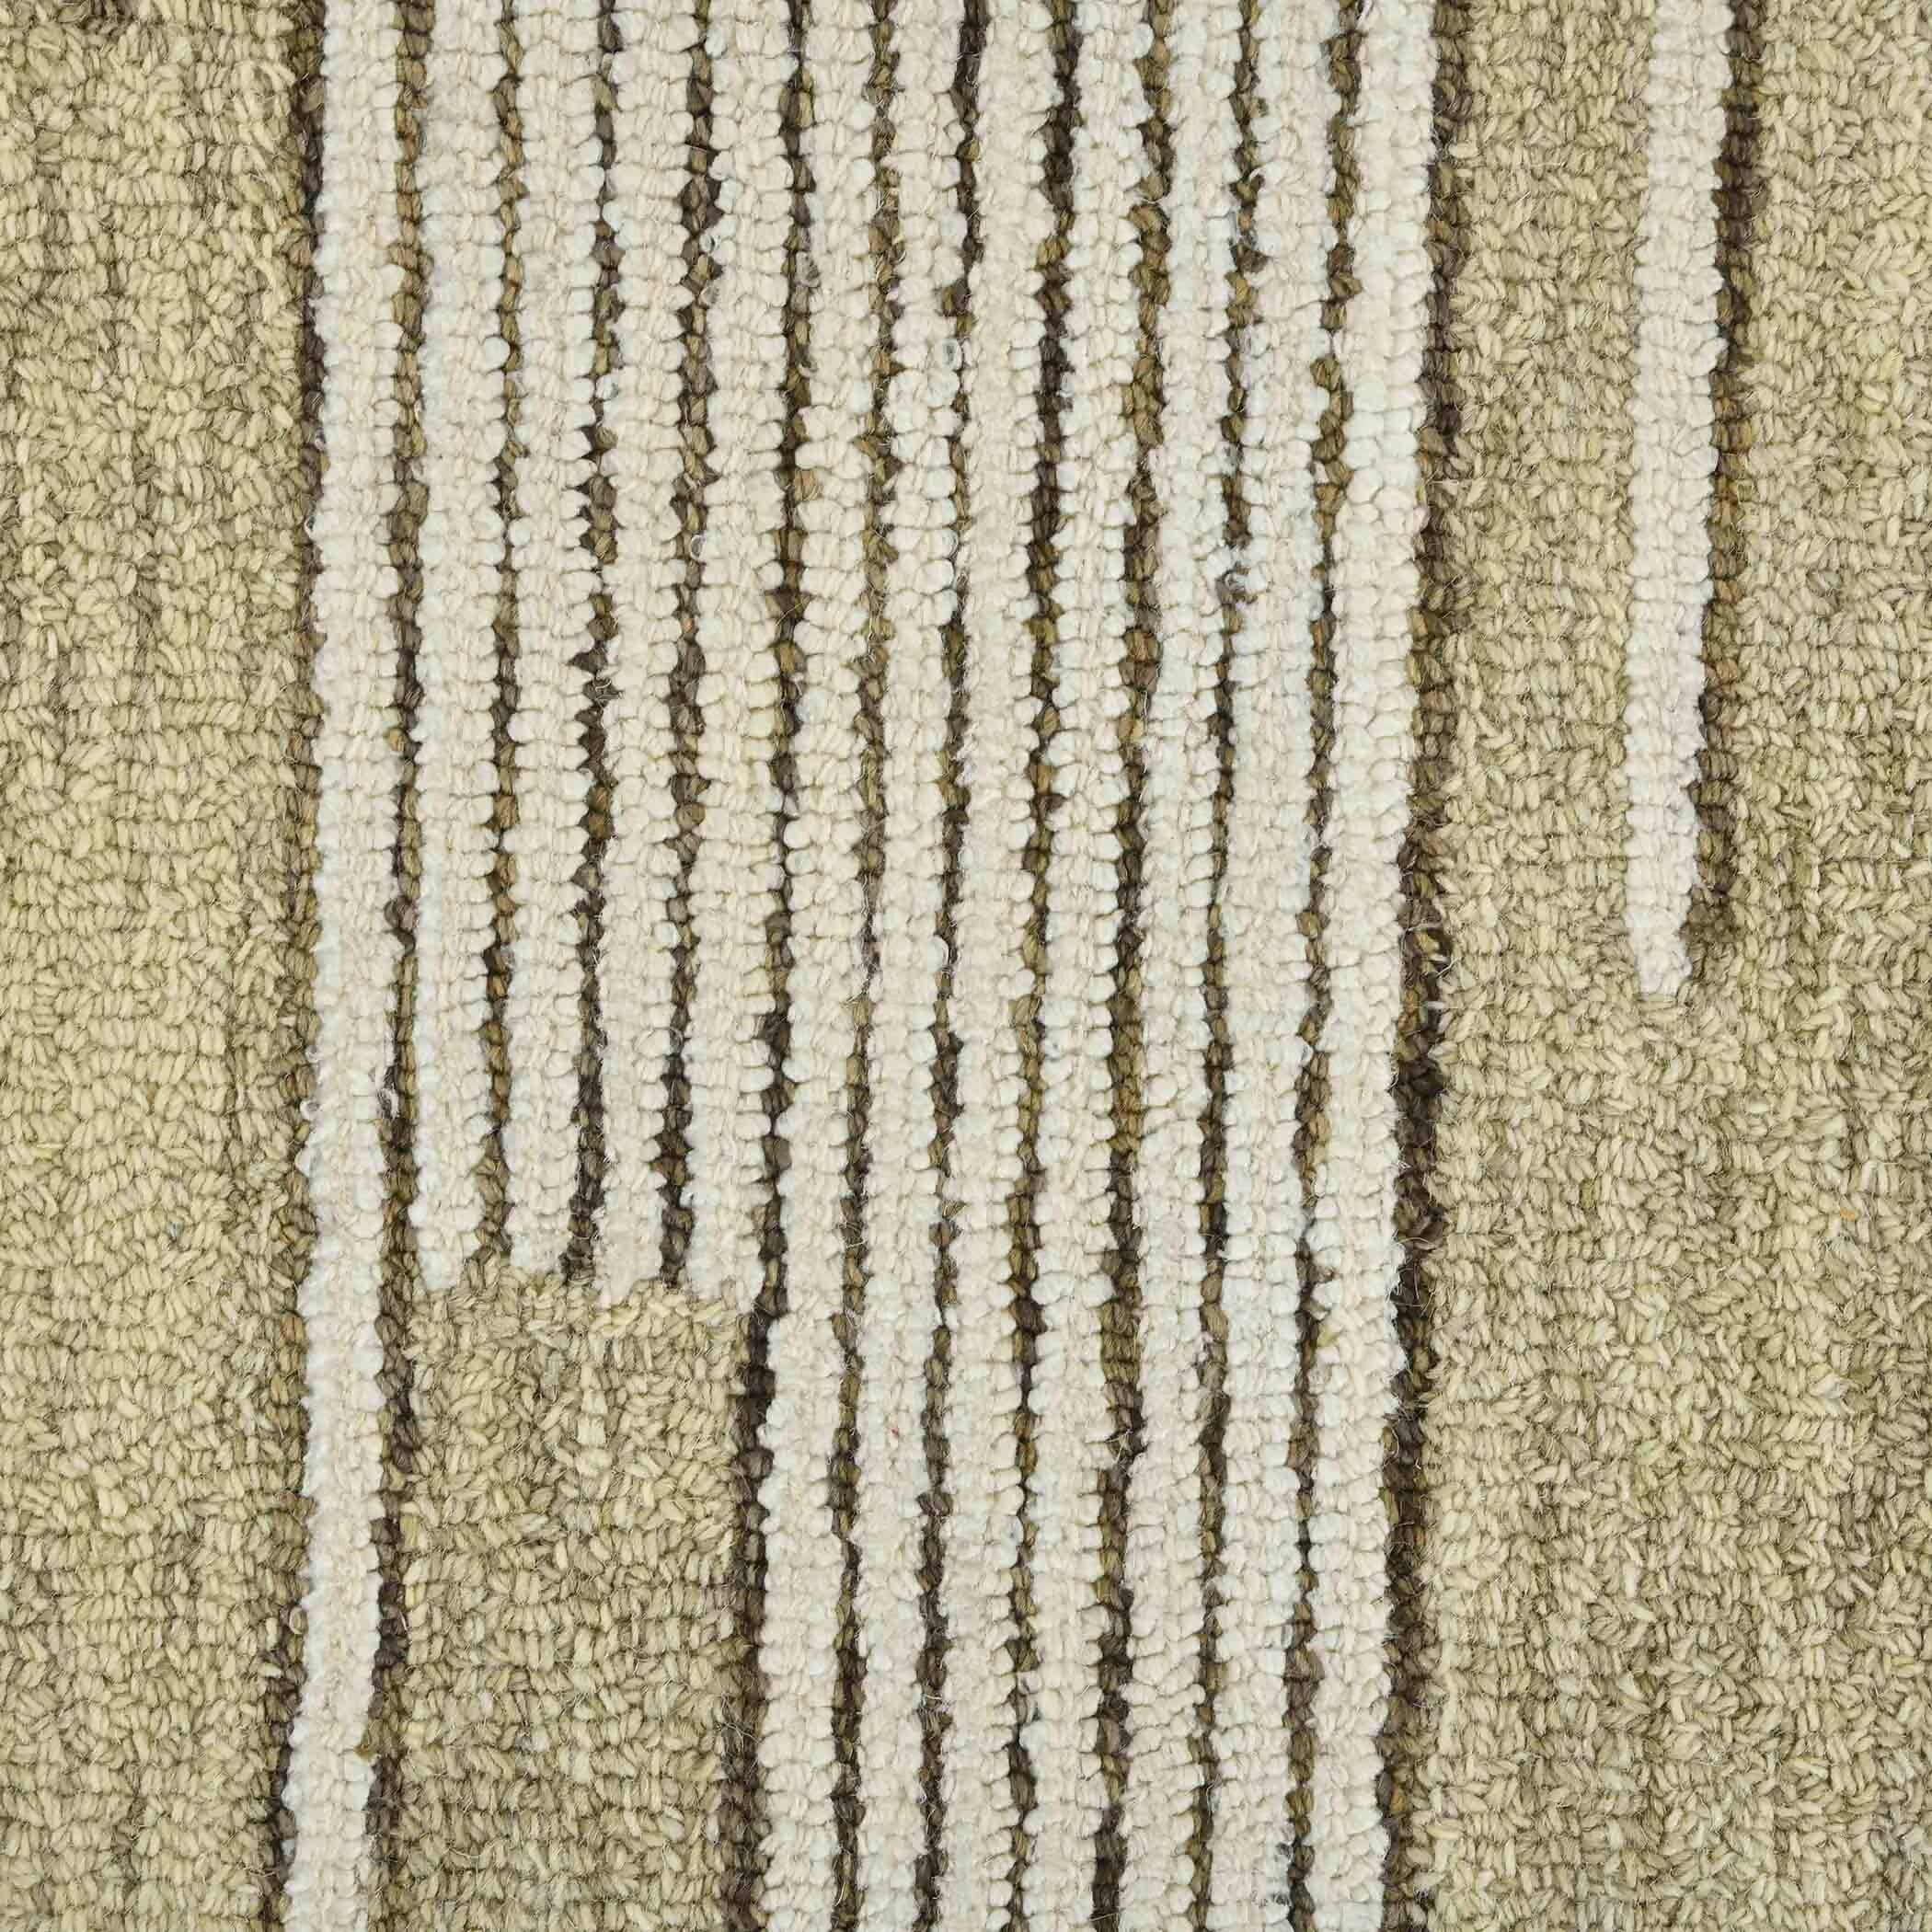 Ivory Wool Chicago 8x10 Feet Hand-Tufted Carpet Rug